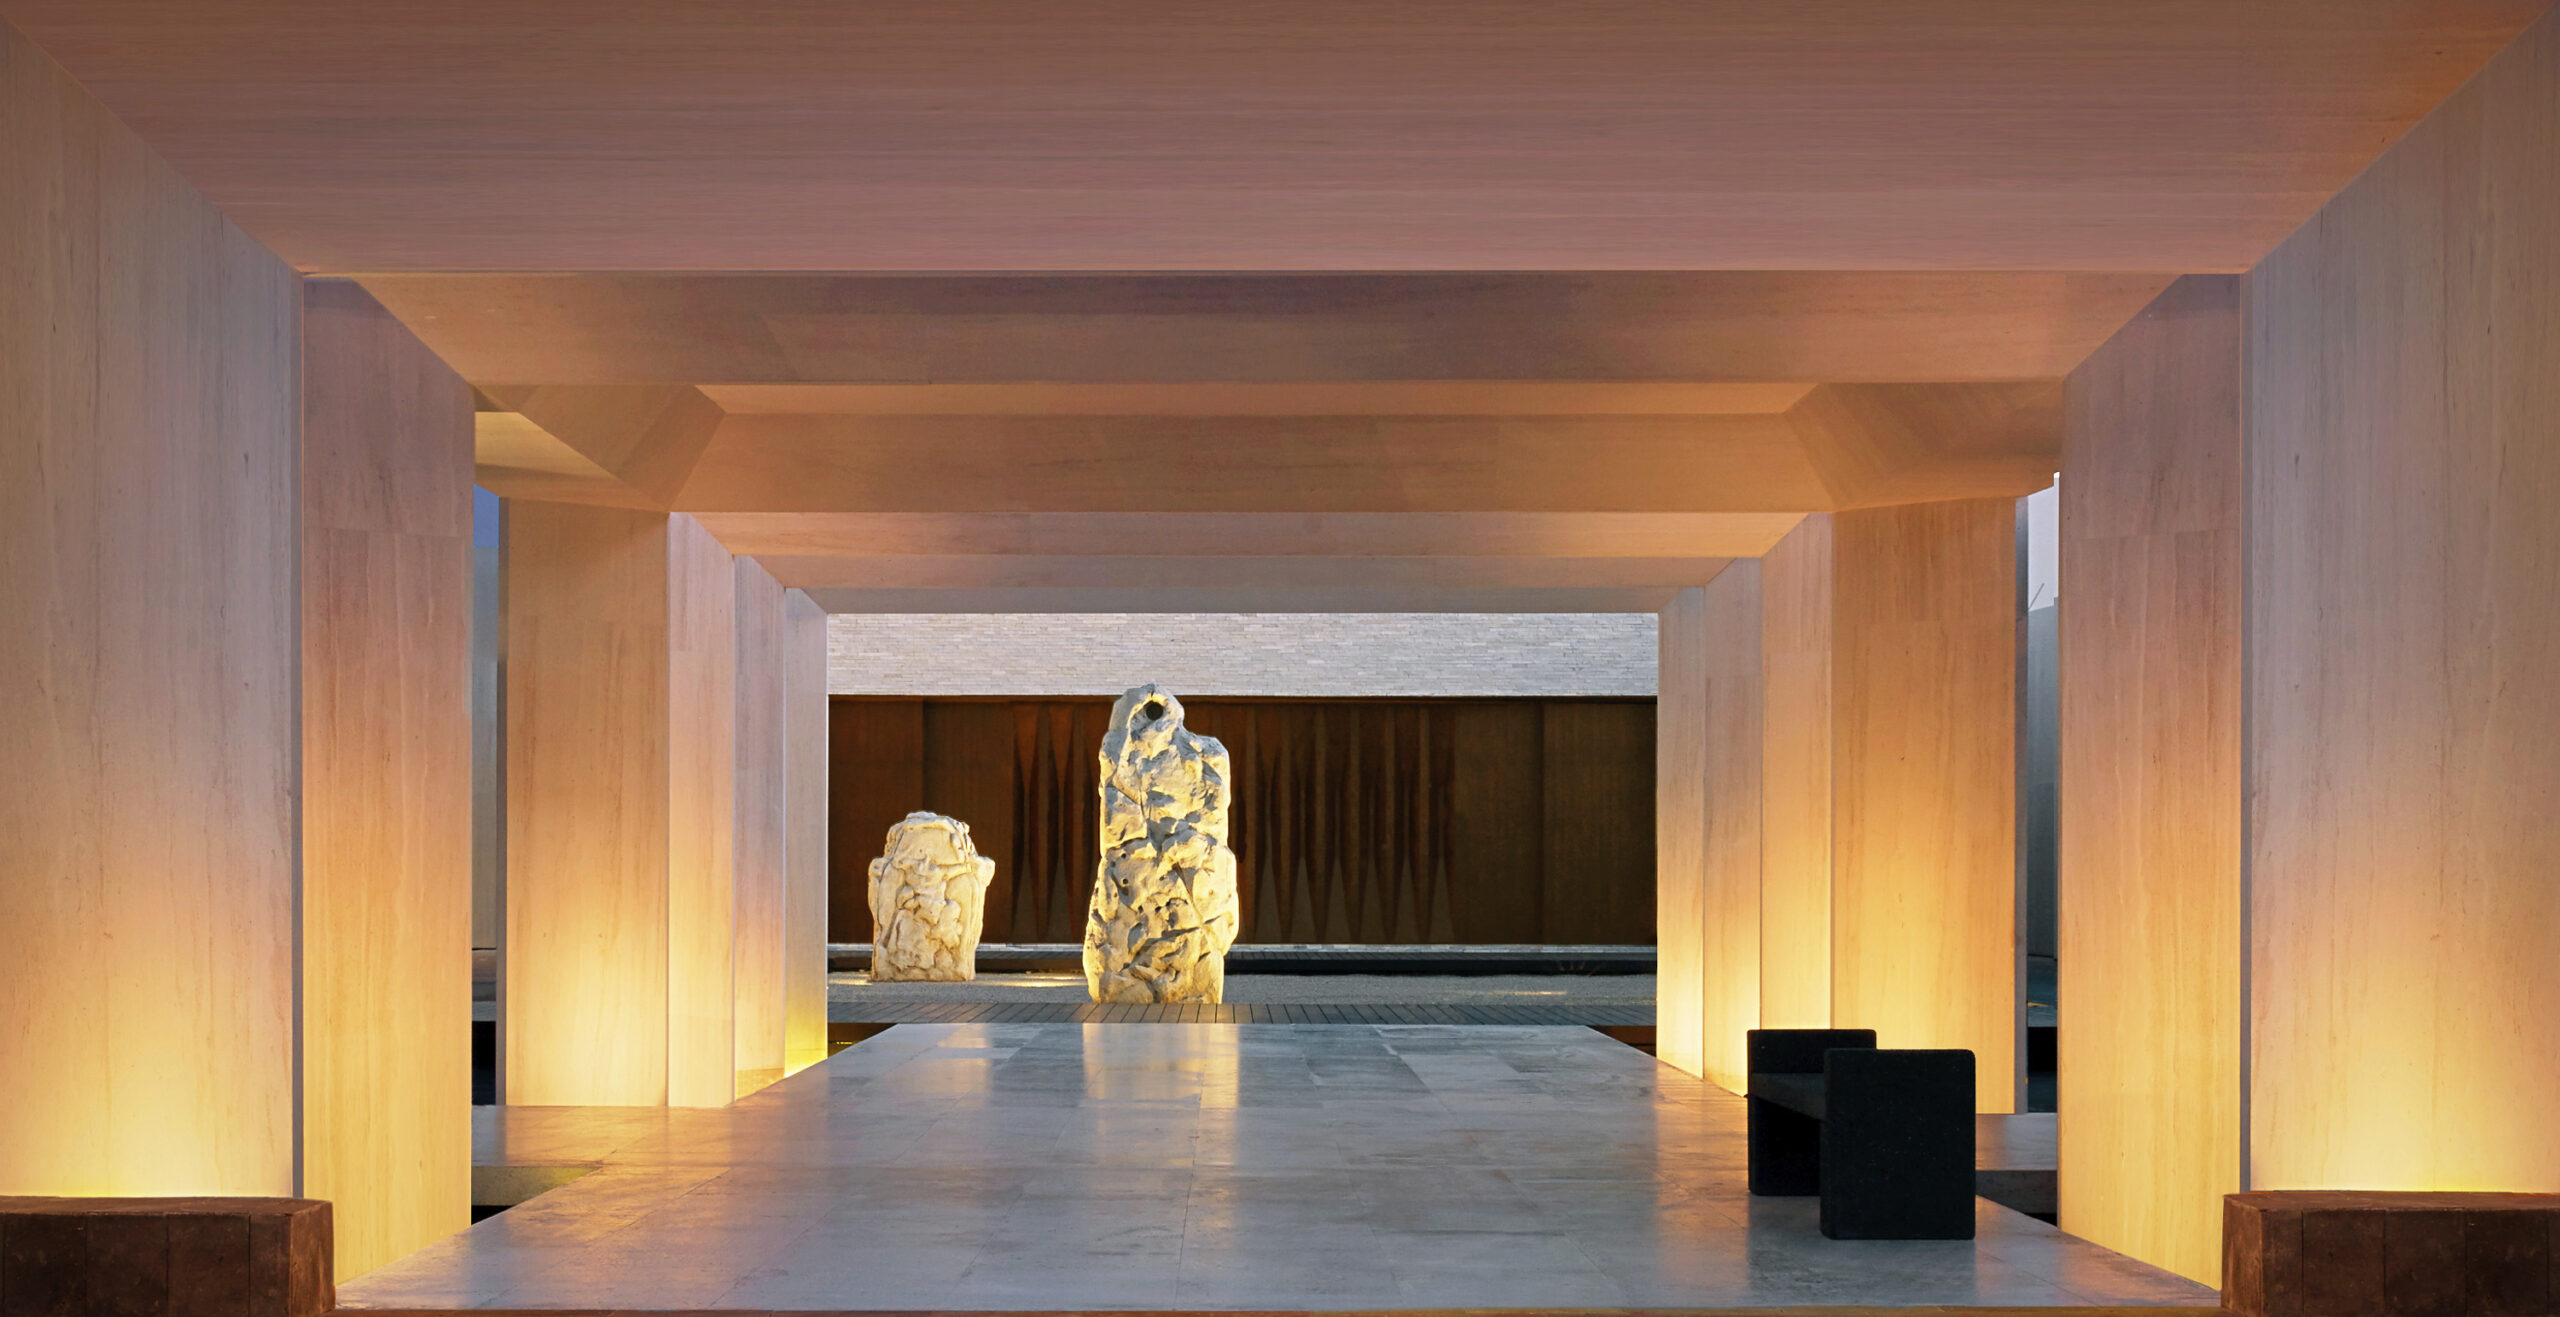 stone arches leading to stone sculptures and the entrance of nobu hotel los cabos. dramatic nightime lighting.